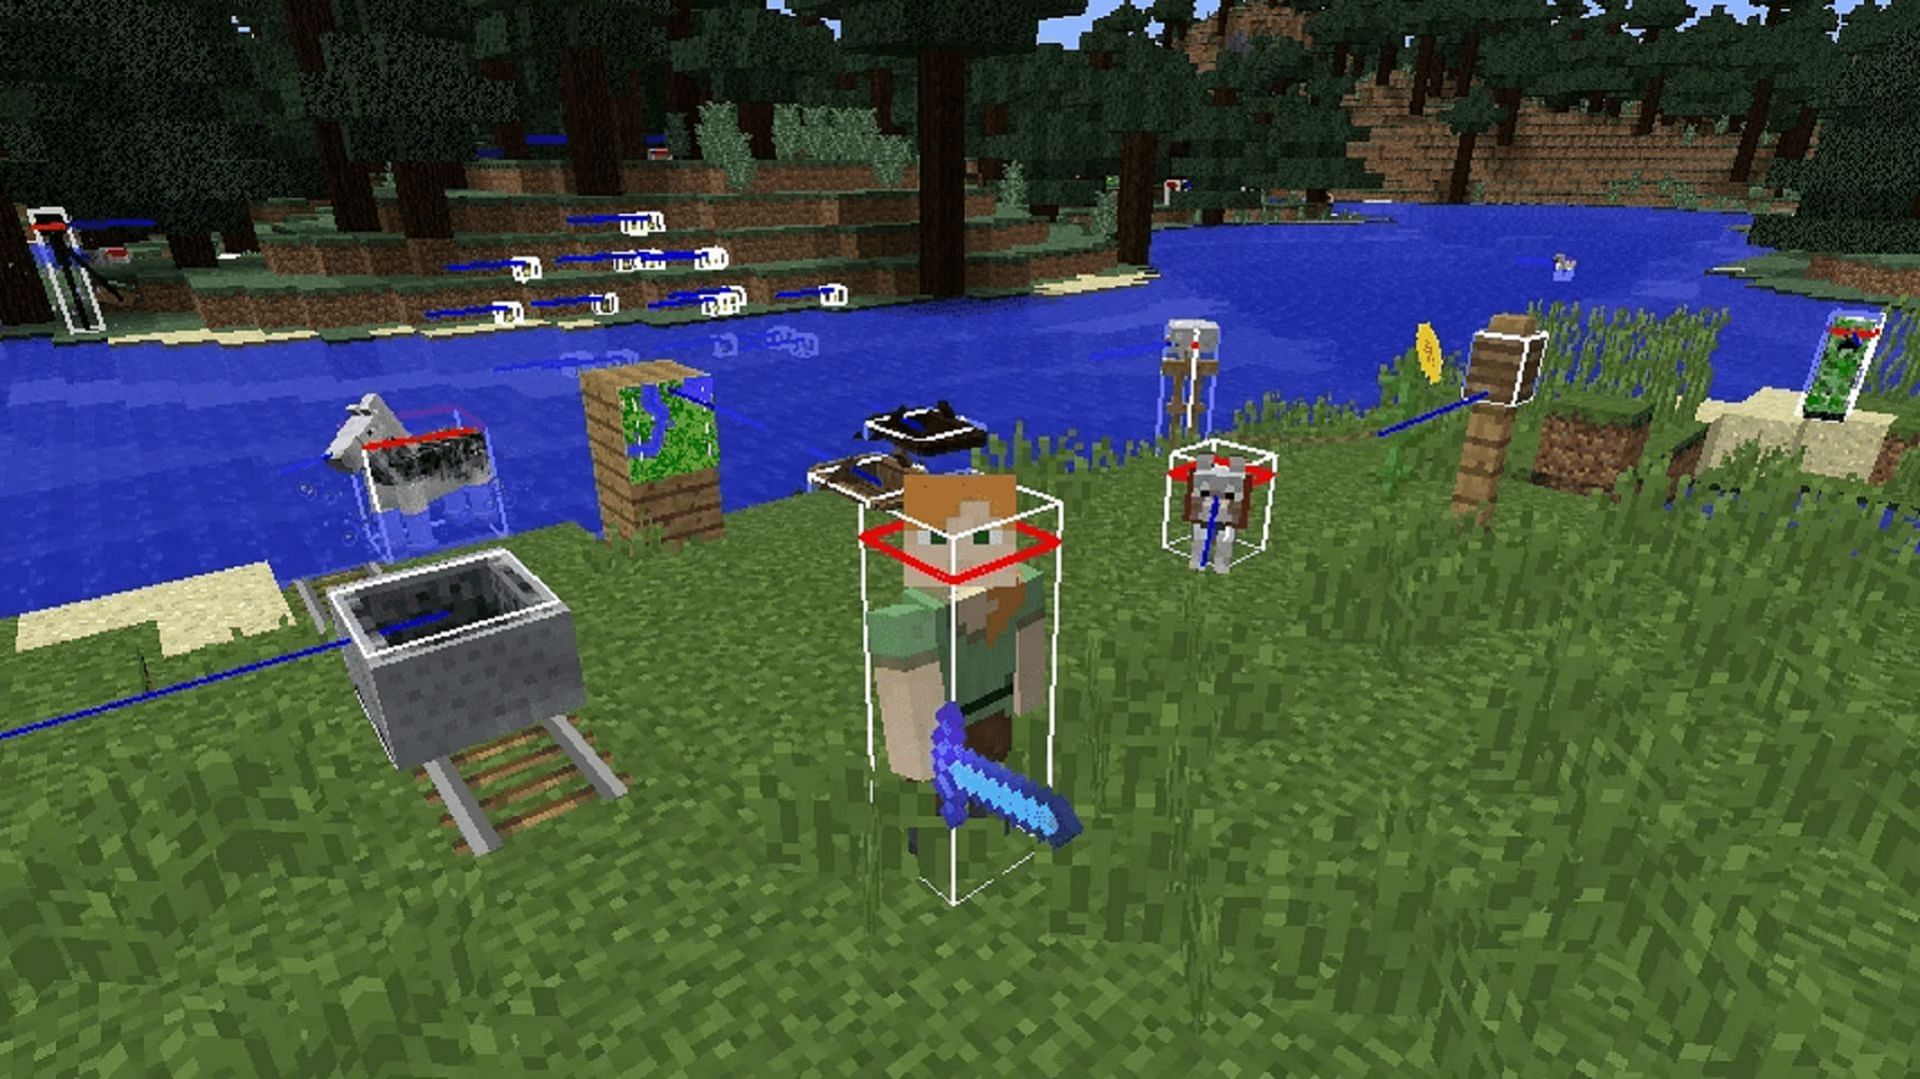 Various entities and their hitboxes in Minecraft (Image via Mojang)